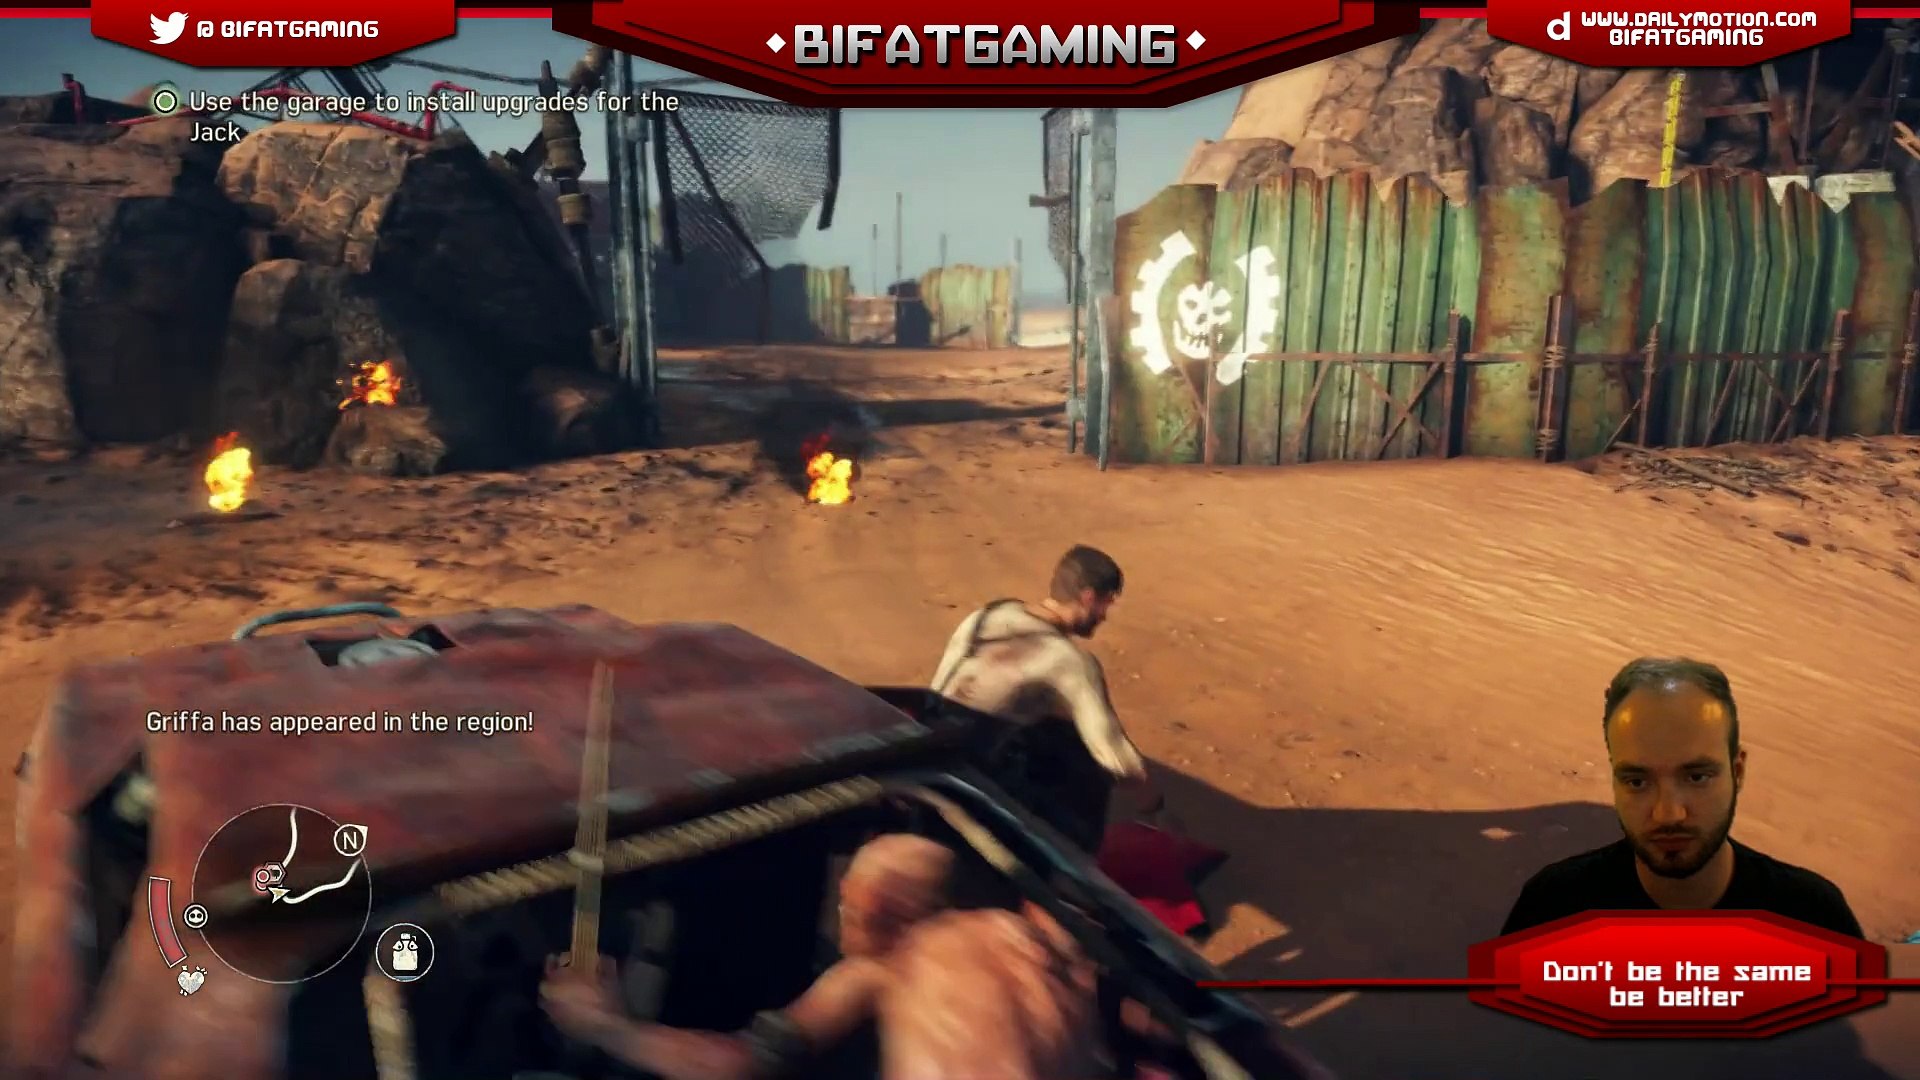 Tank Camp Wrecked - Mad Max PC Walkthrough 60fps 1080p - video Dailymotion